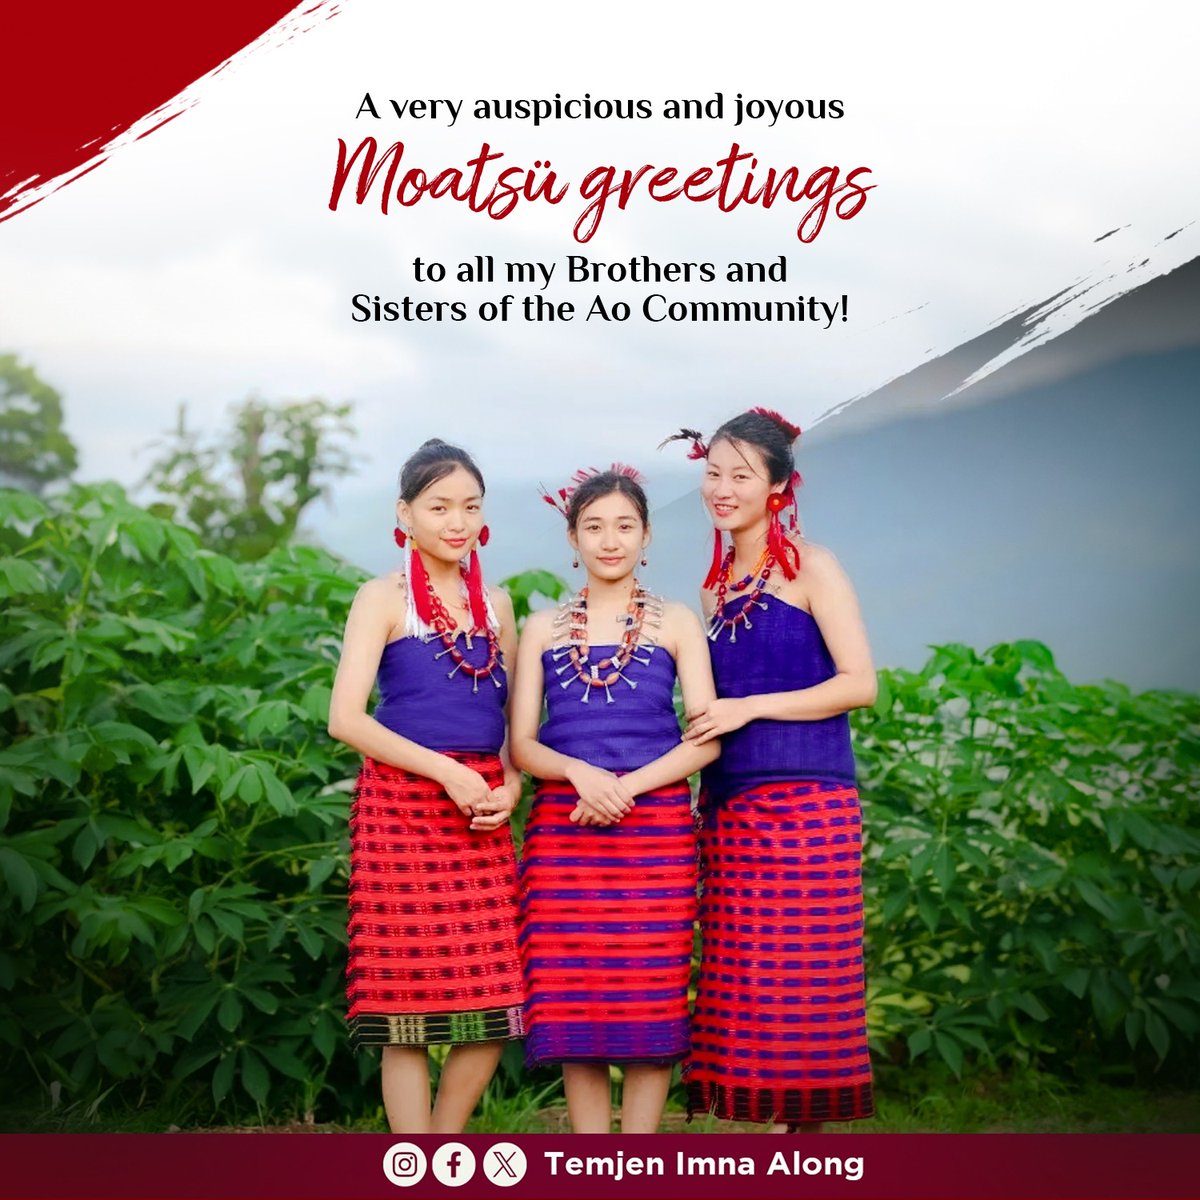 On this auspicious occasion of Moatsü, may divine blessings lead to a year of good health, abundant harvests, and everlasting peace for the community. Celebrate this time of togetherness with joy and gratitude.